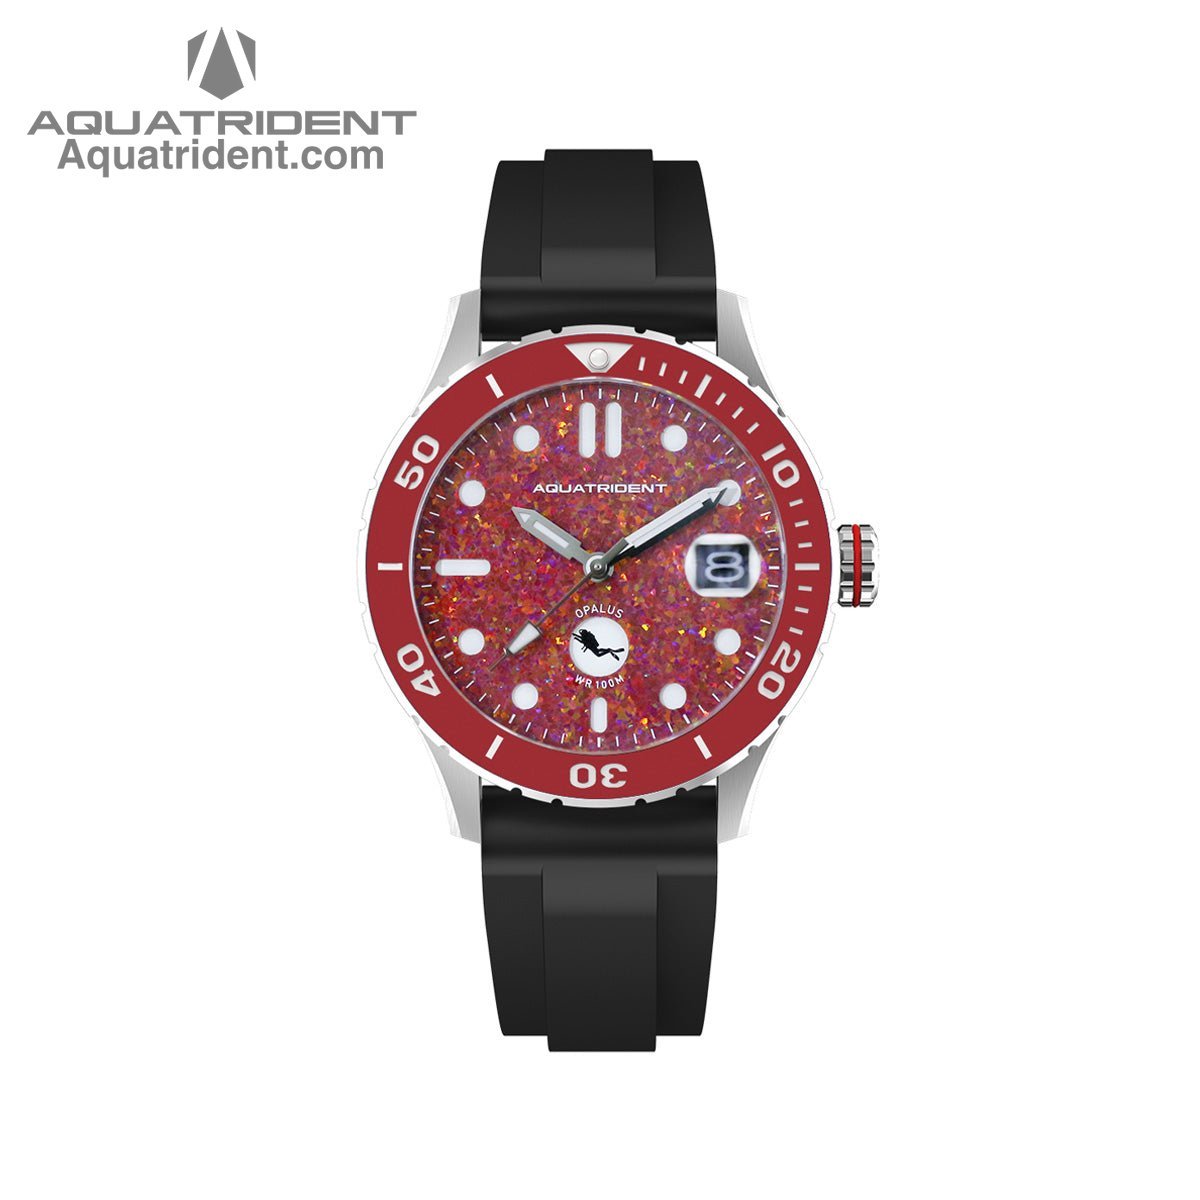 Aquatrident's Ocean Automatic Watch with Ceramic，Rotating, 120 clicks Bezel and red opal Dial front view